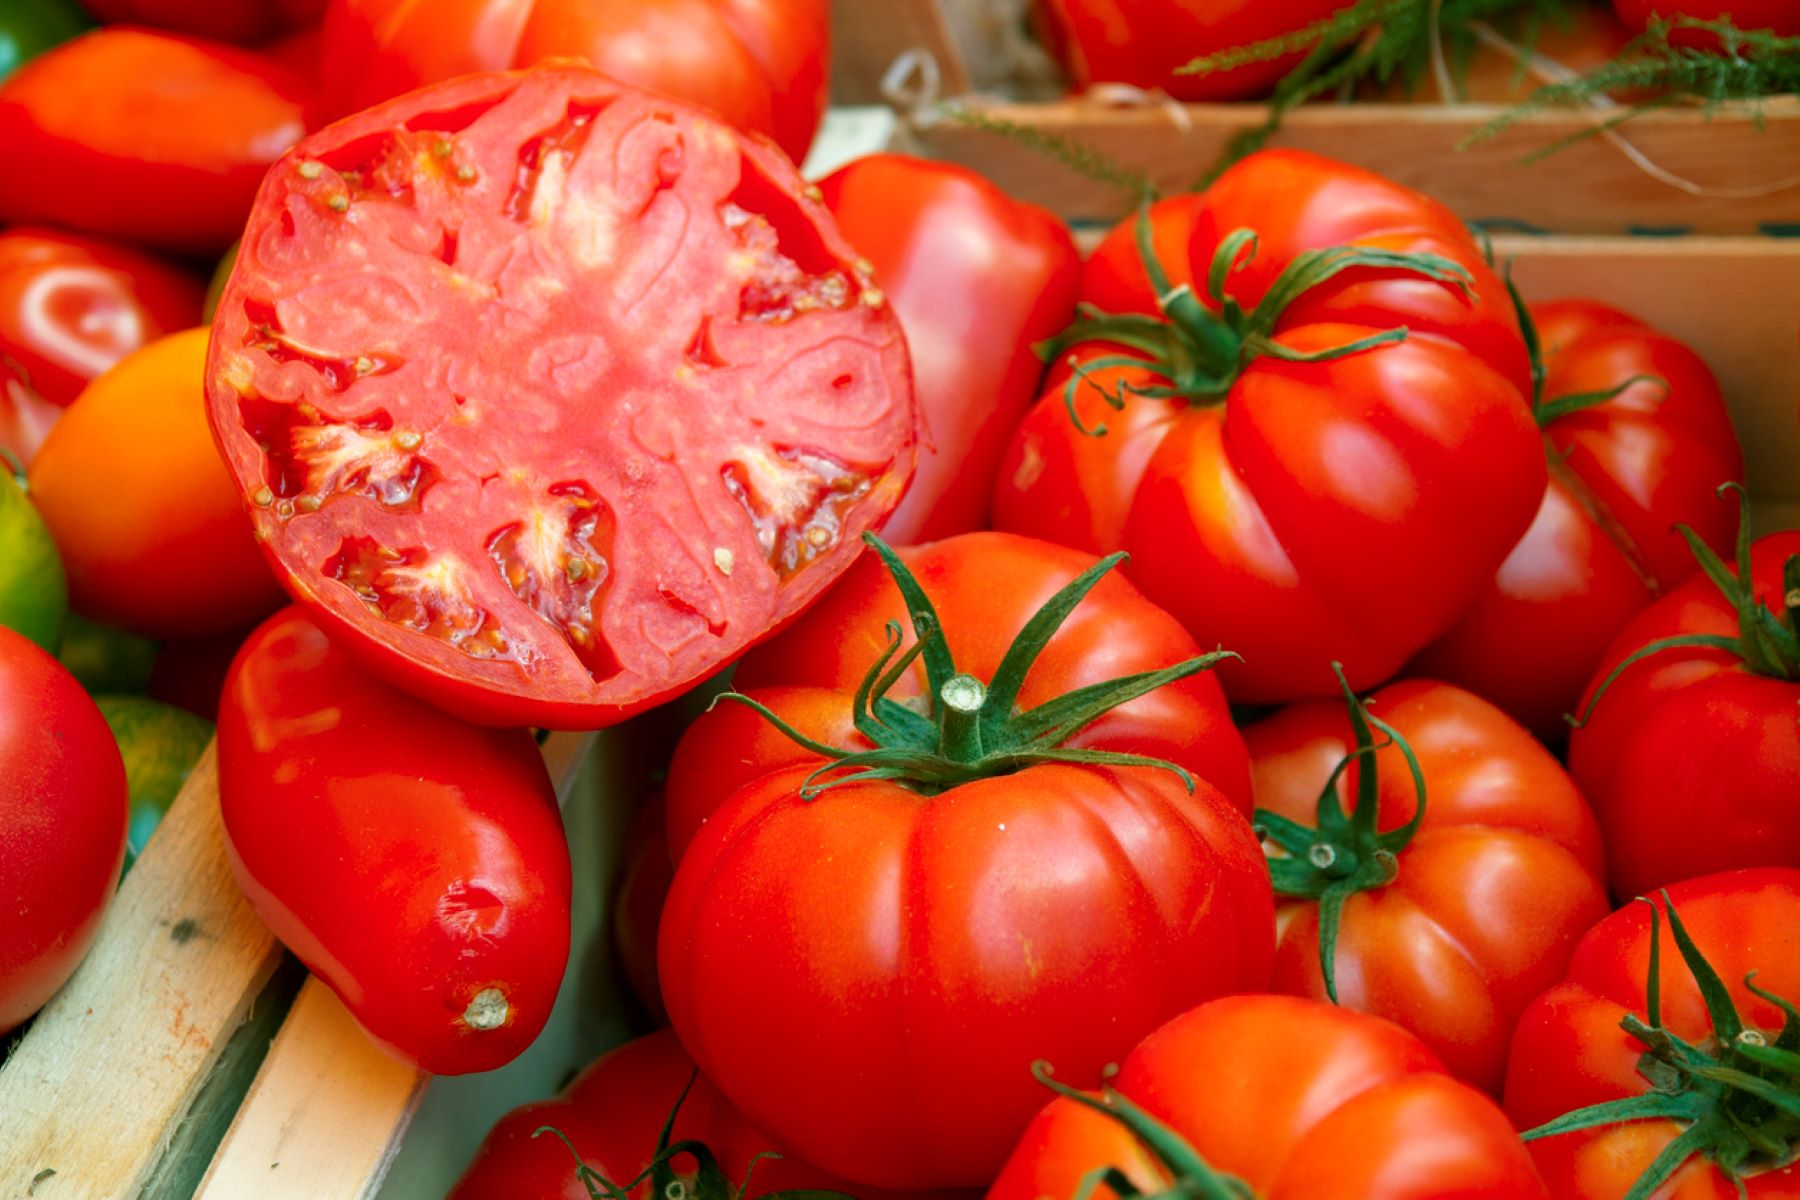 Discover The Surprising Way Beefsteak Tomatoes Can Thrive - Upside Down!